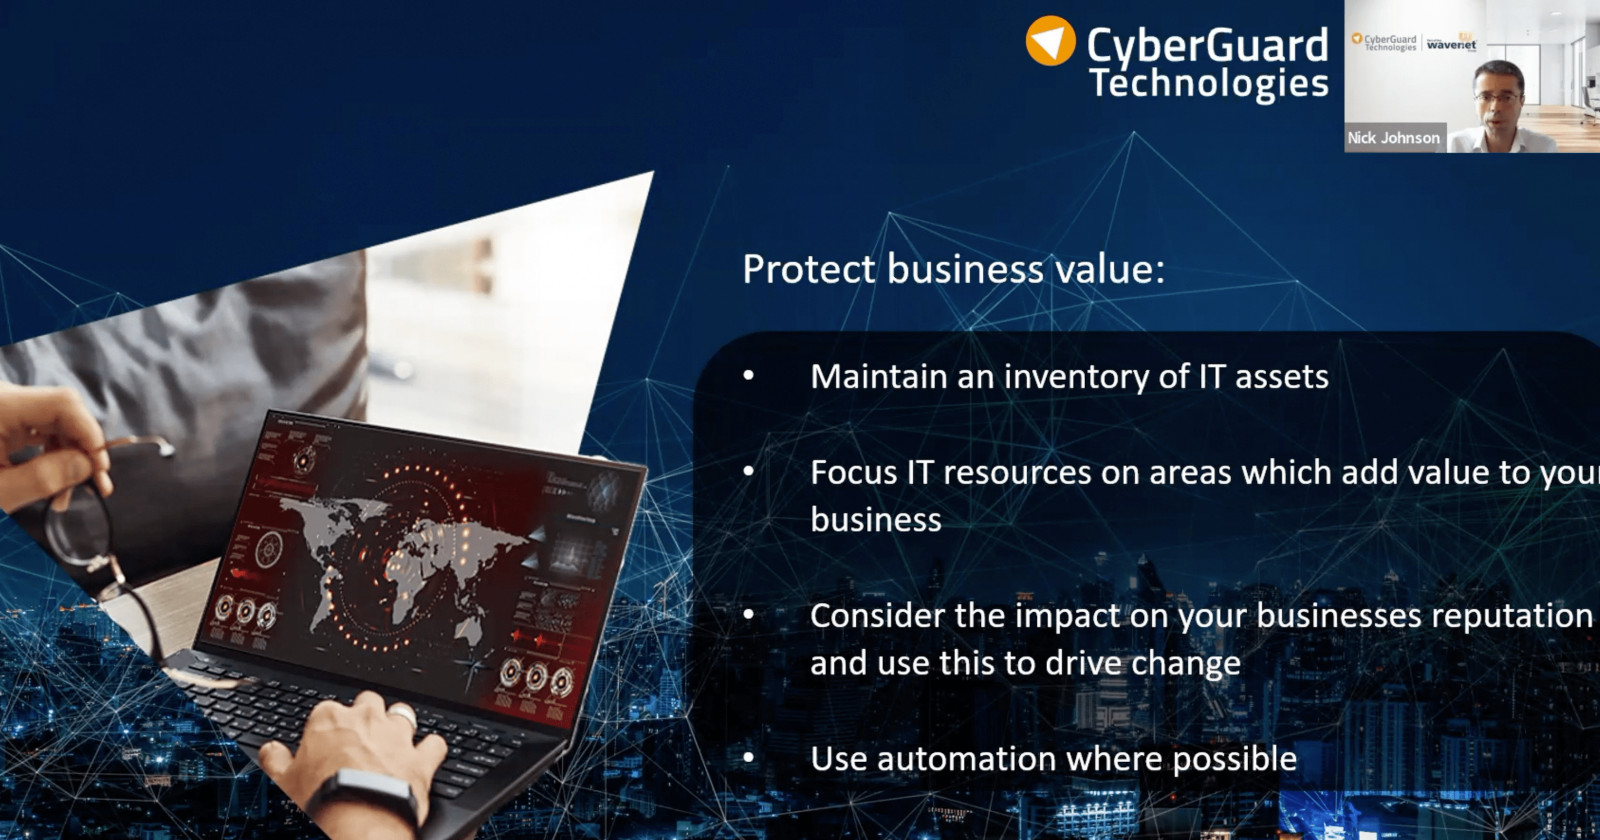 How Can Cybersecurity Add Genuine Value to Your Business?